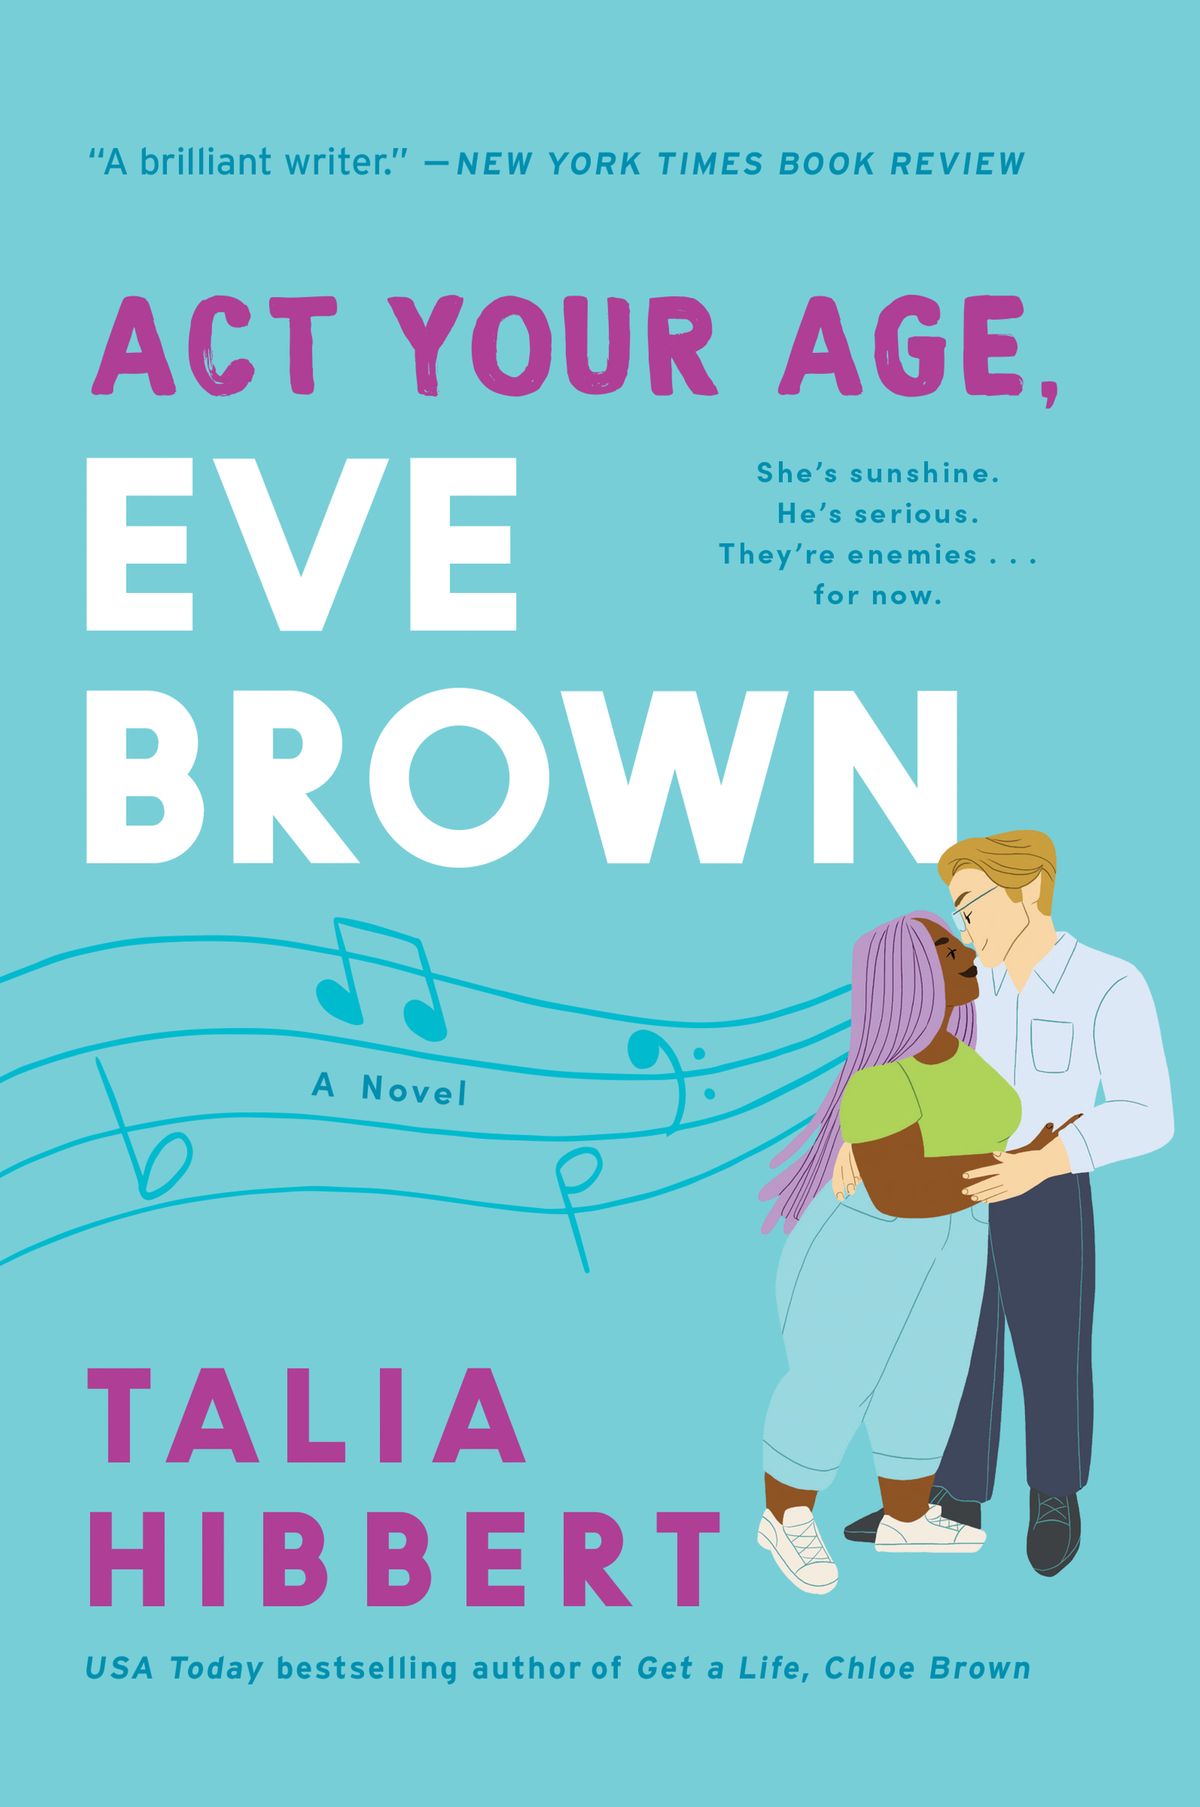 Act Your Age, Eve Brown, by Talia Hibbert | The StoryGraph